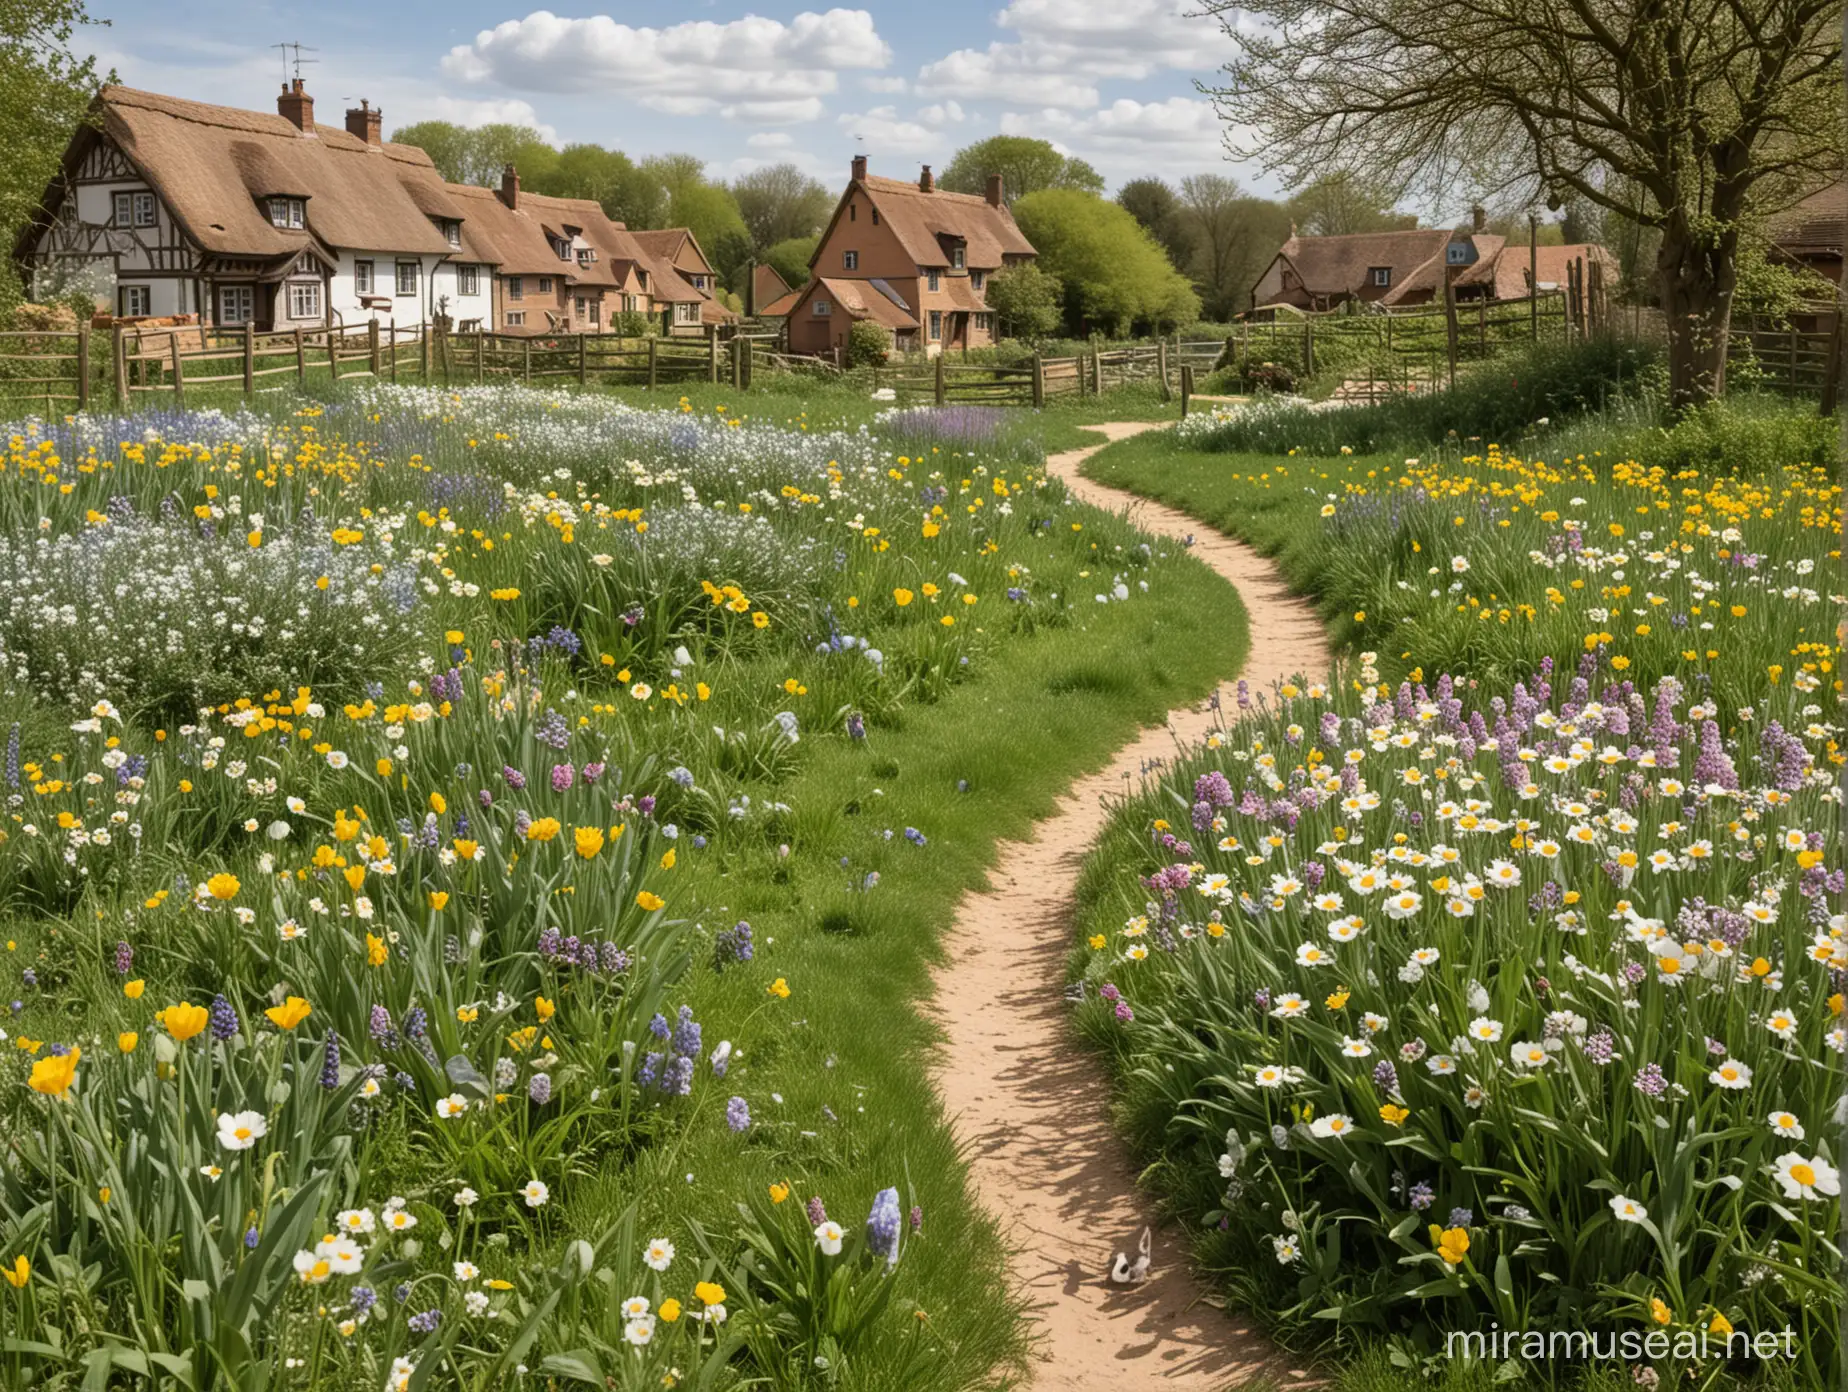 spring flower meadow, a path off to one side, next to a basket of eggs and some rabbits, some houses in the distance